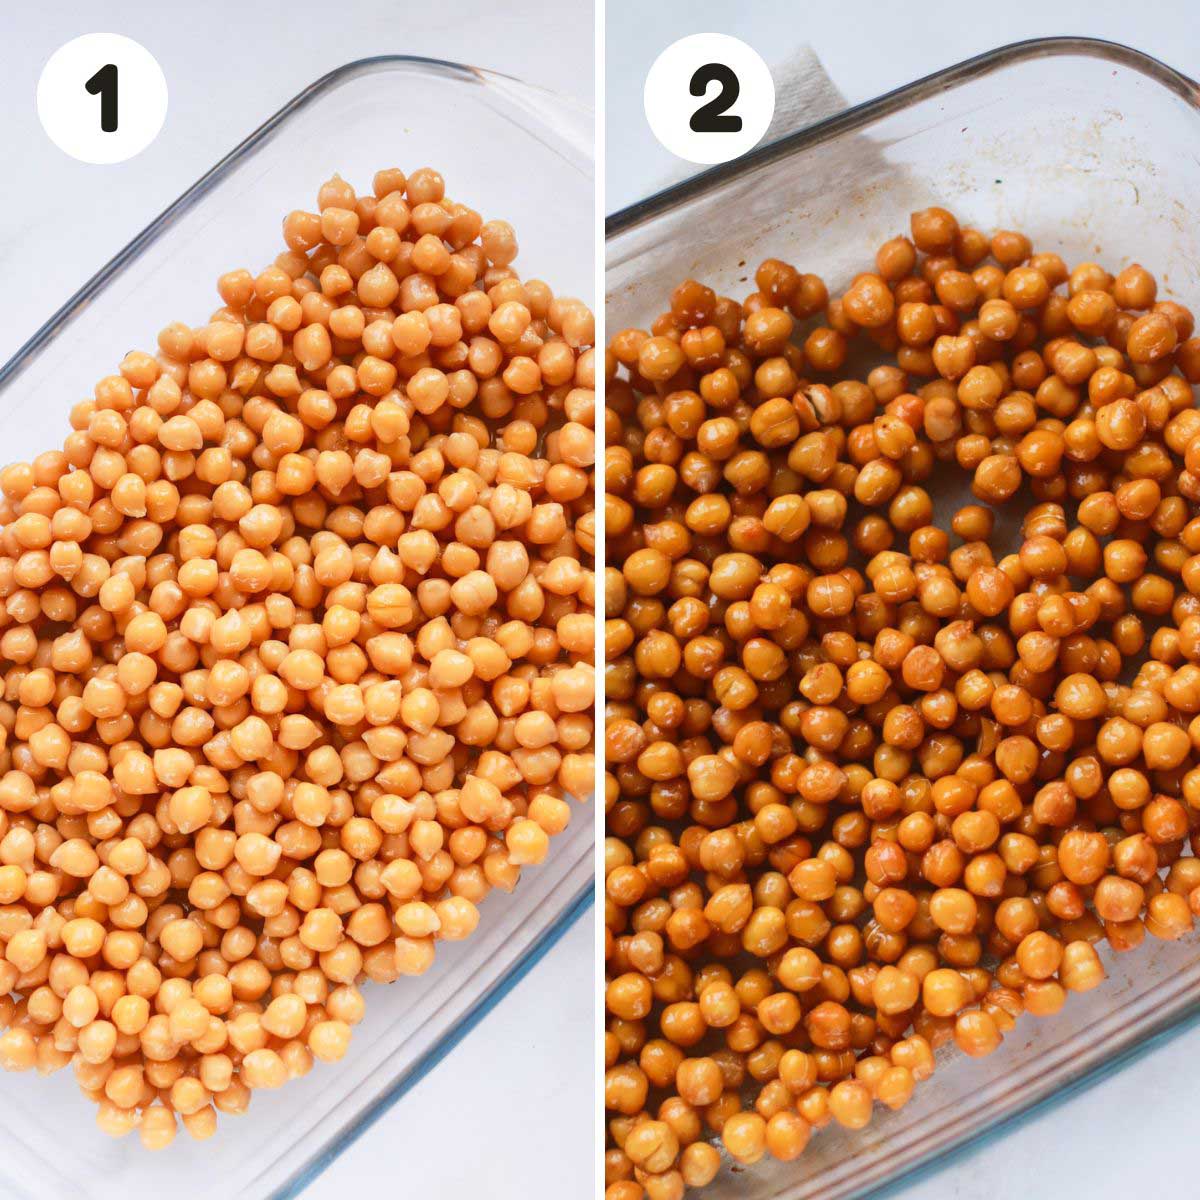 two image process making oven roasted chickpeas.